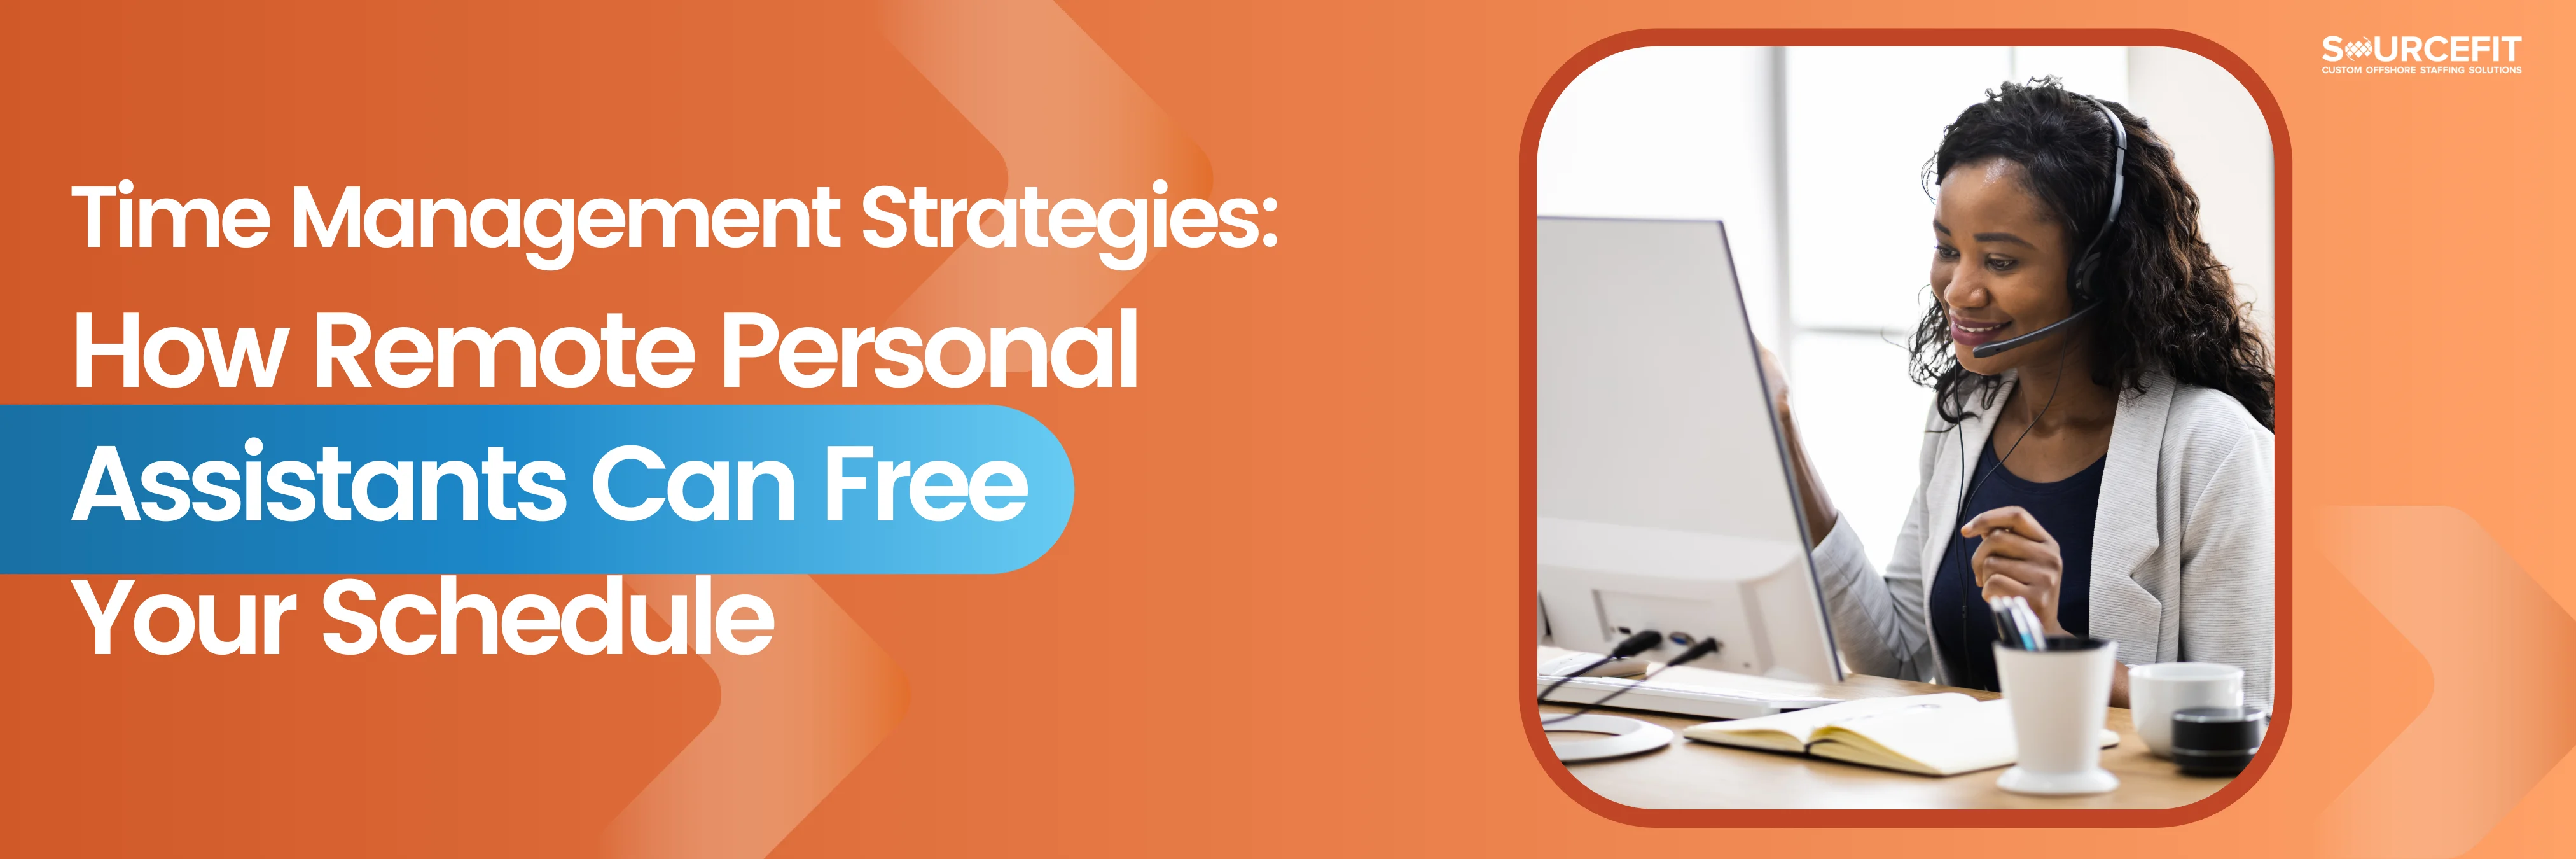 How-Remote-Personal-Assistants-Can-Free-Your-Schedule_1200x628